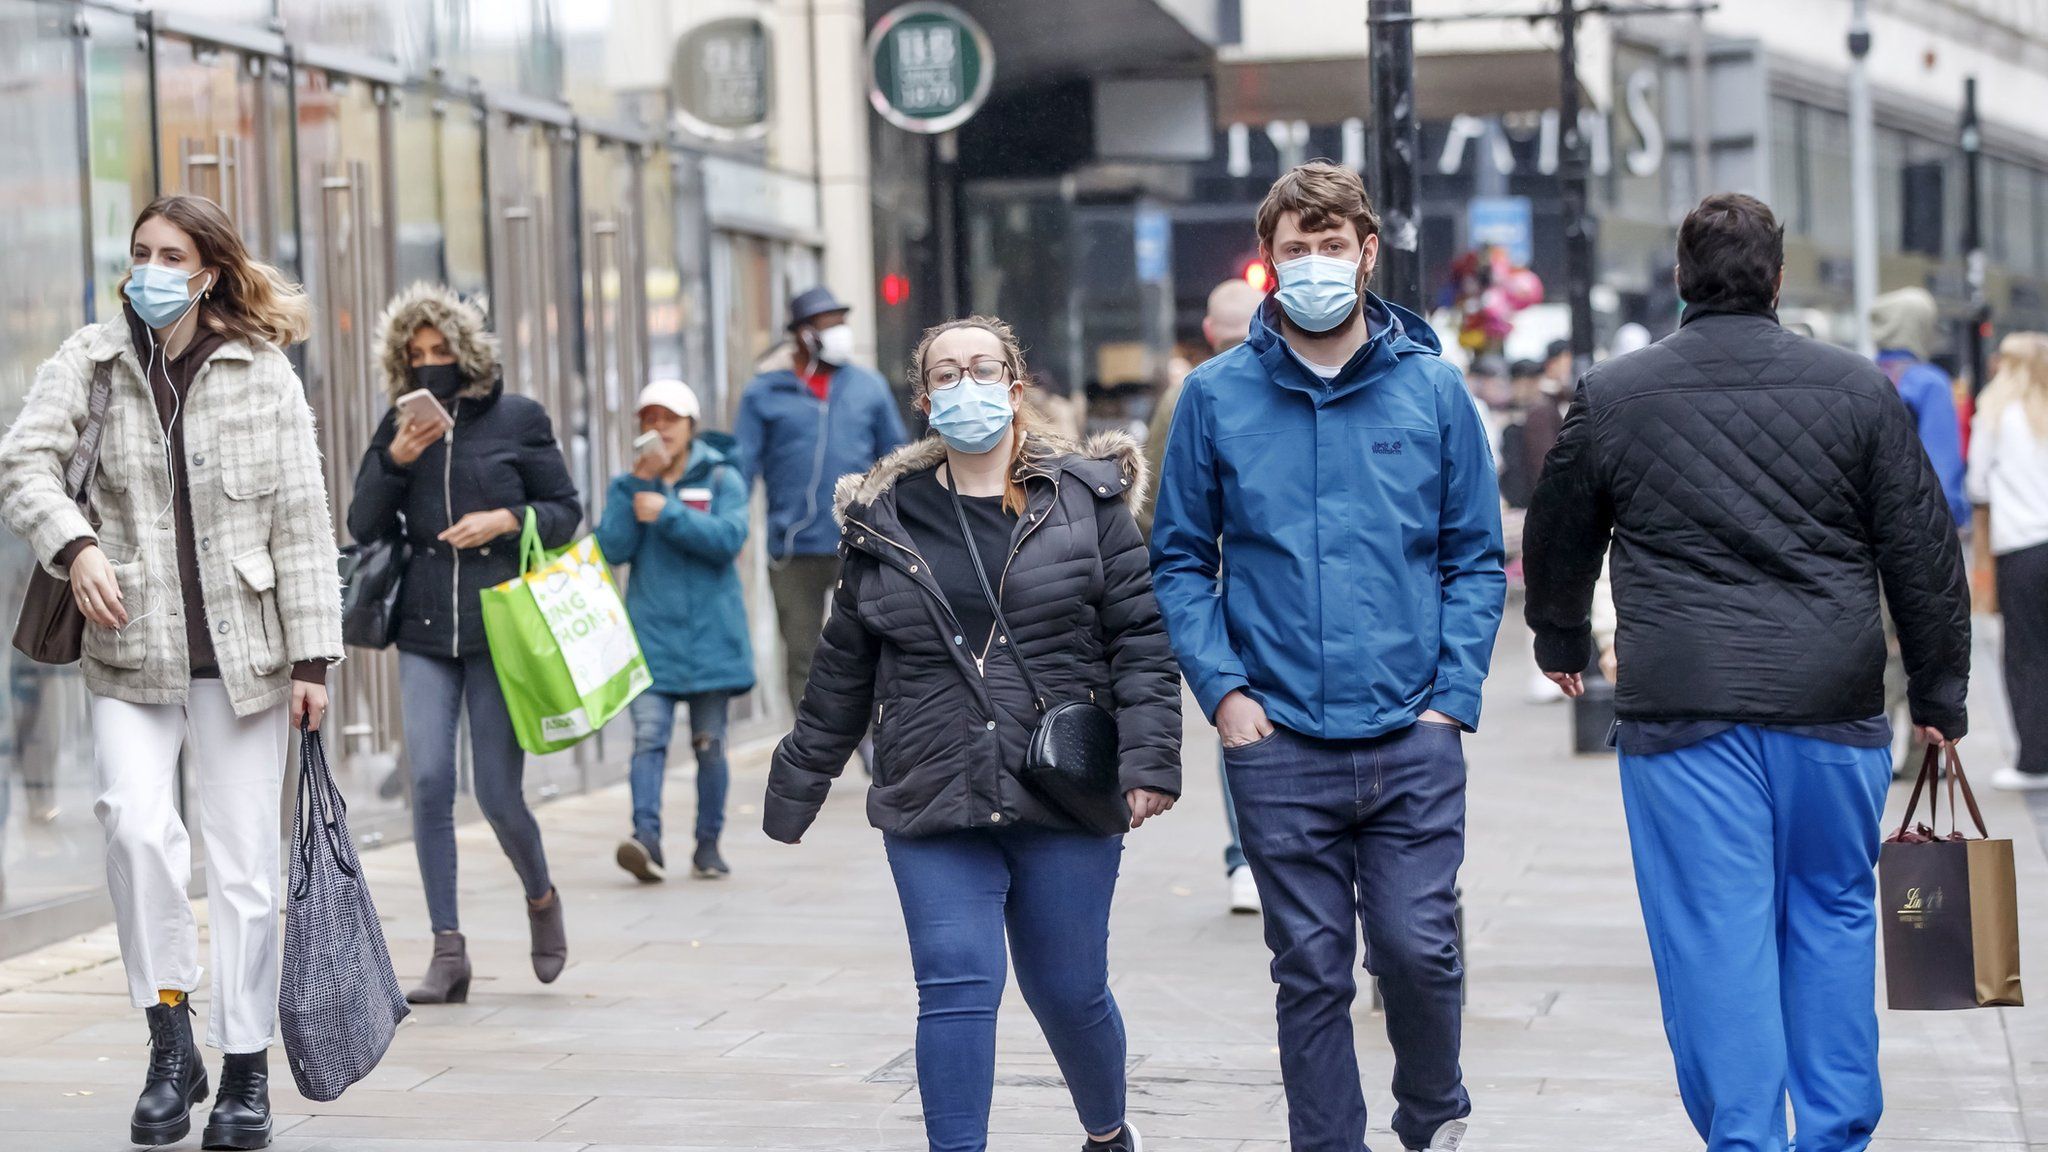 People wear face coverings in Manchester City Centre